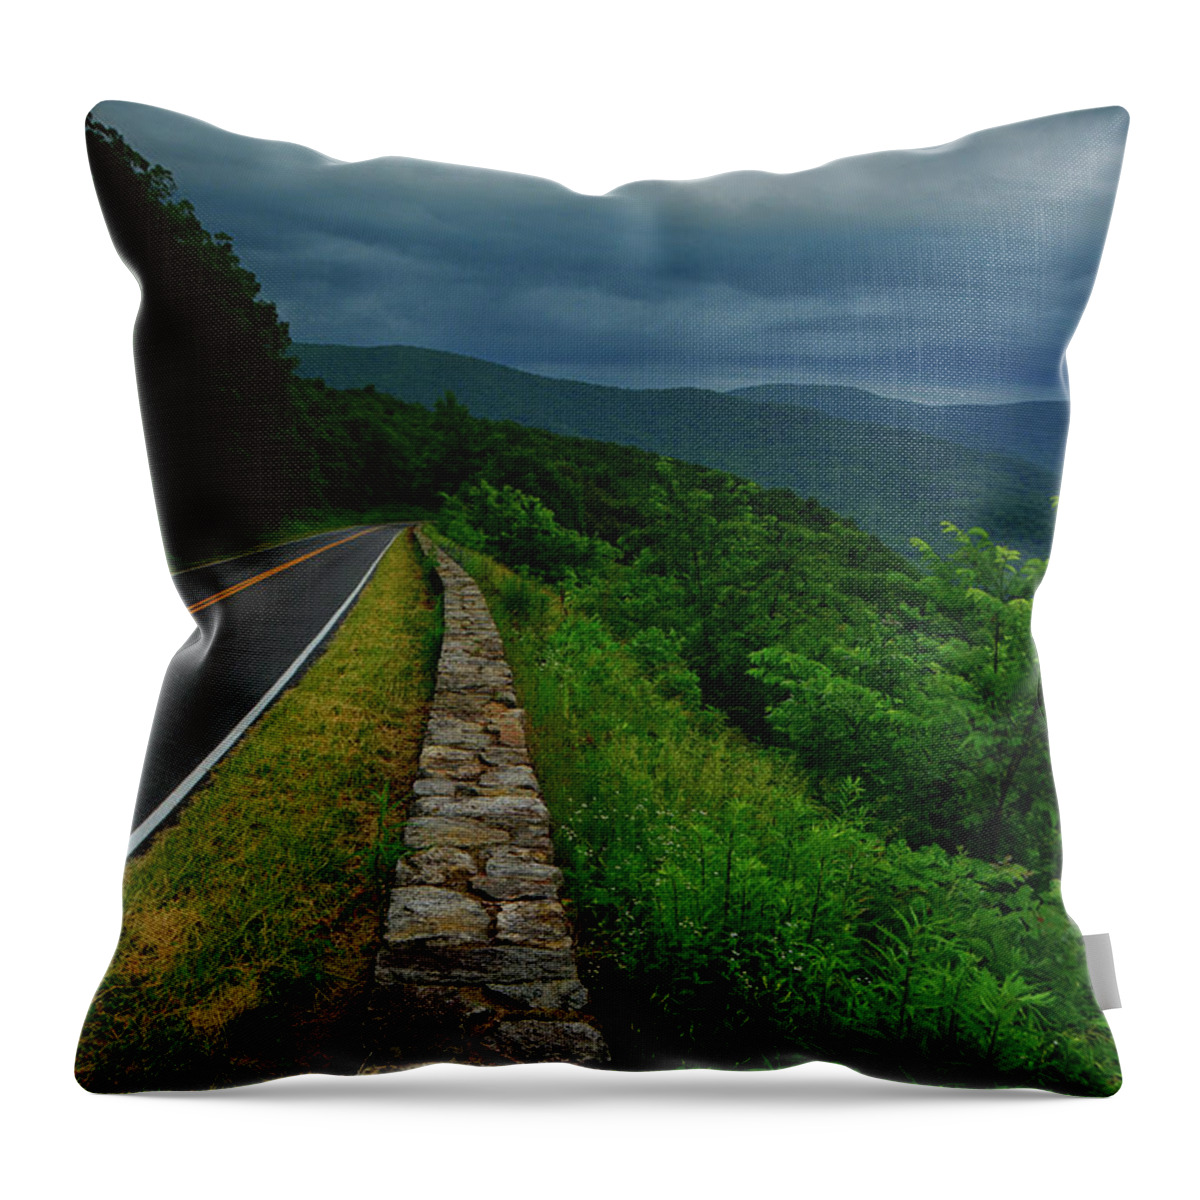 Storm Arrives At Shenandoah National Park Throw Pillow featuring the photograph Storm Arrives at Shenandoah National Park by Raymond Salani III